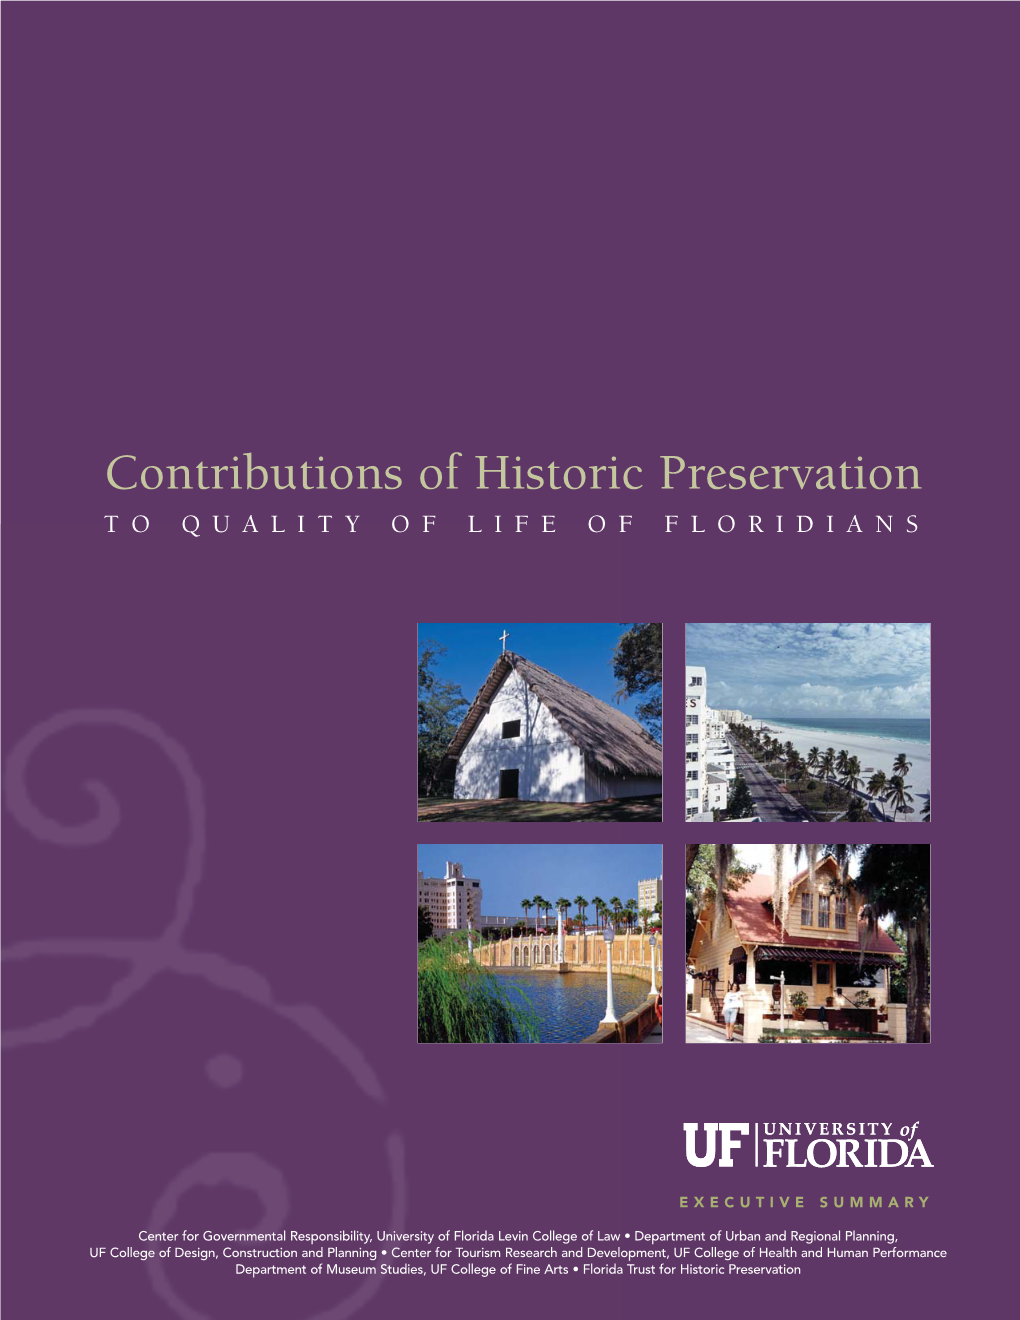 Contributions of Historic Preservation to QUALITY of LIFE of FLORIDIANS